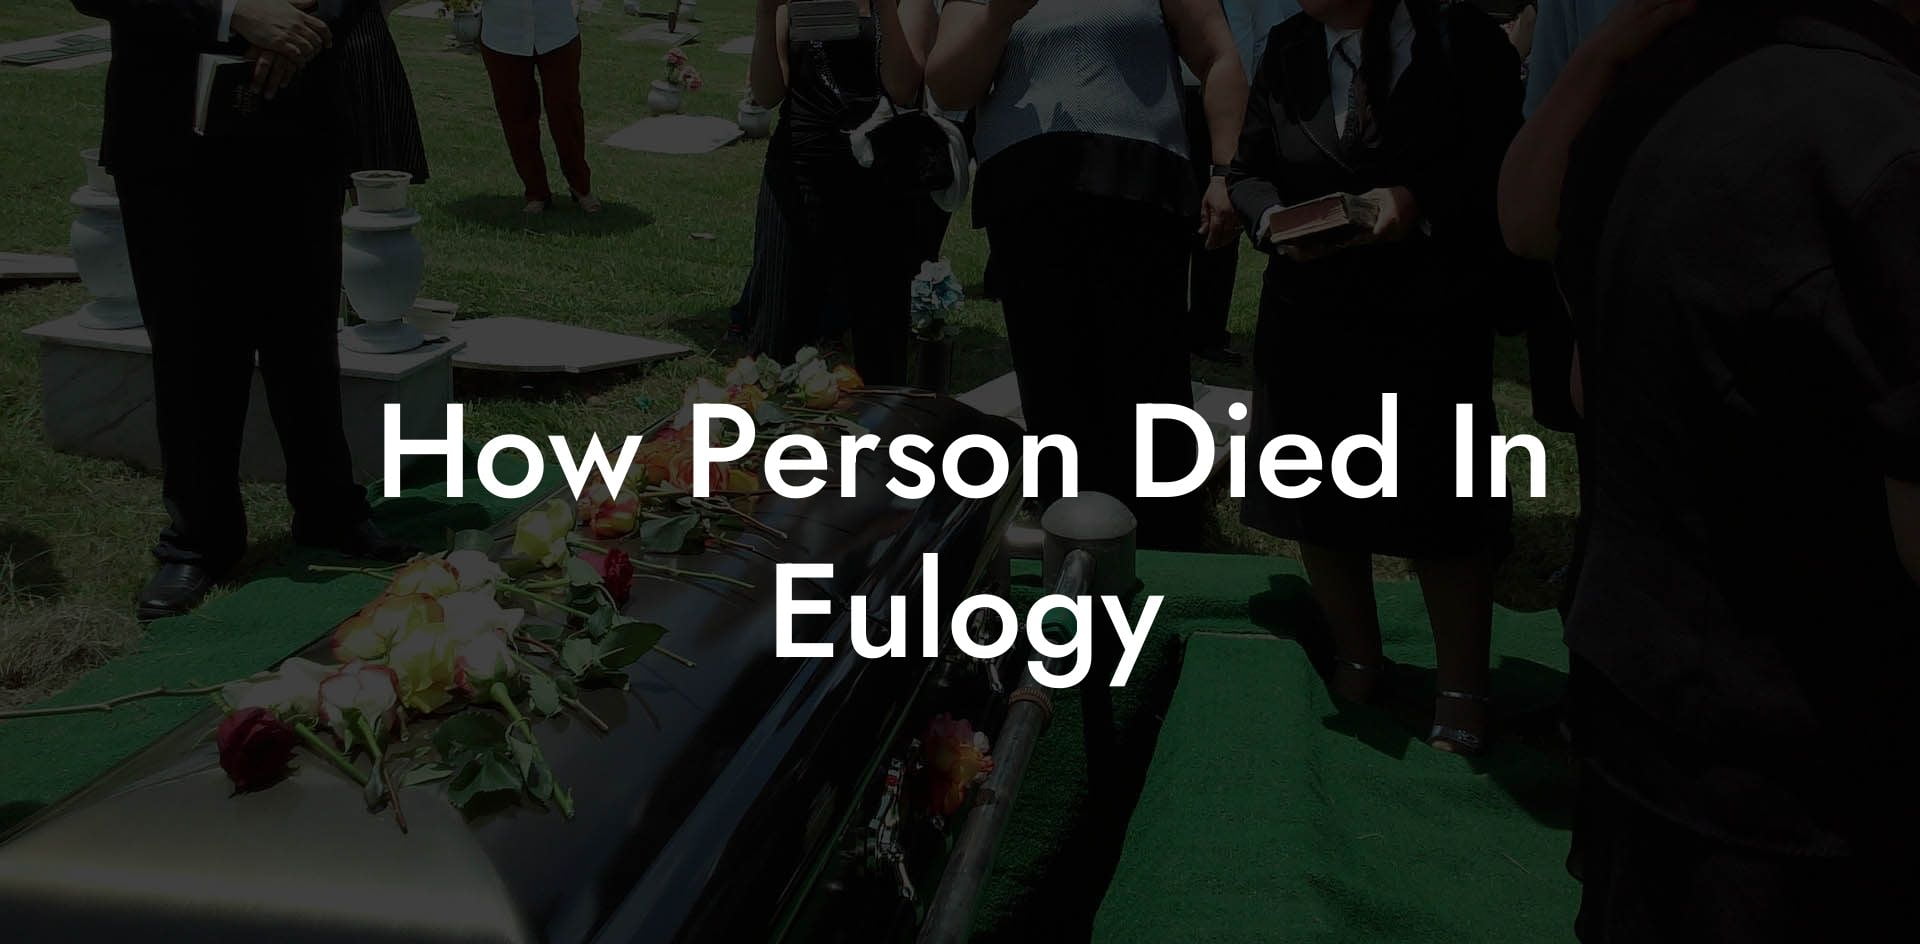 How Person Died In Eulogy